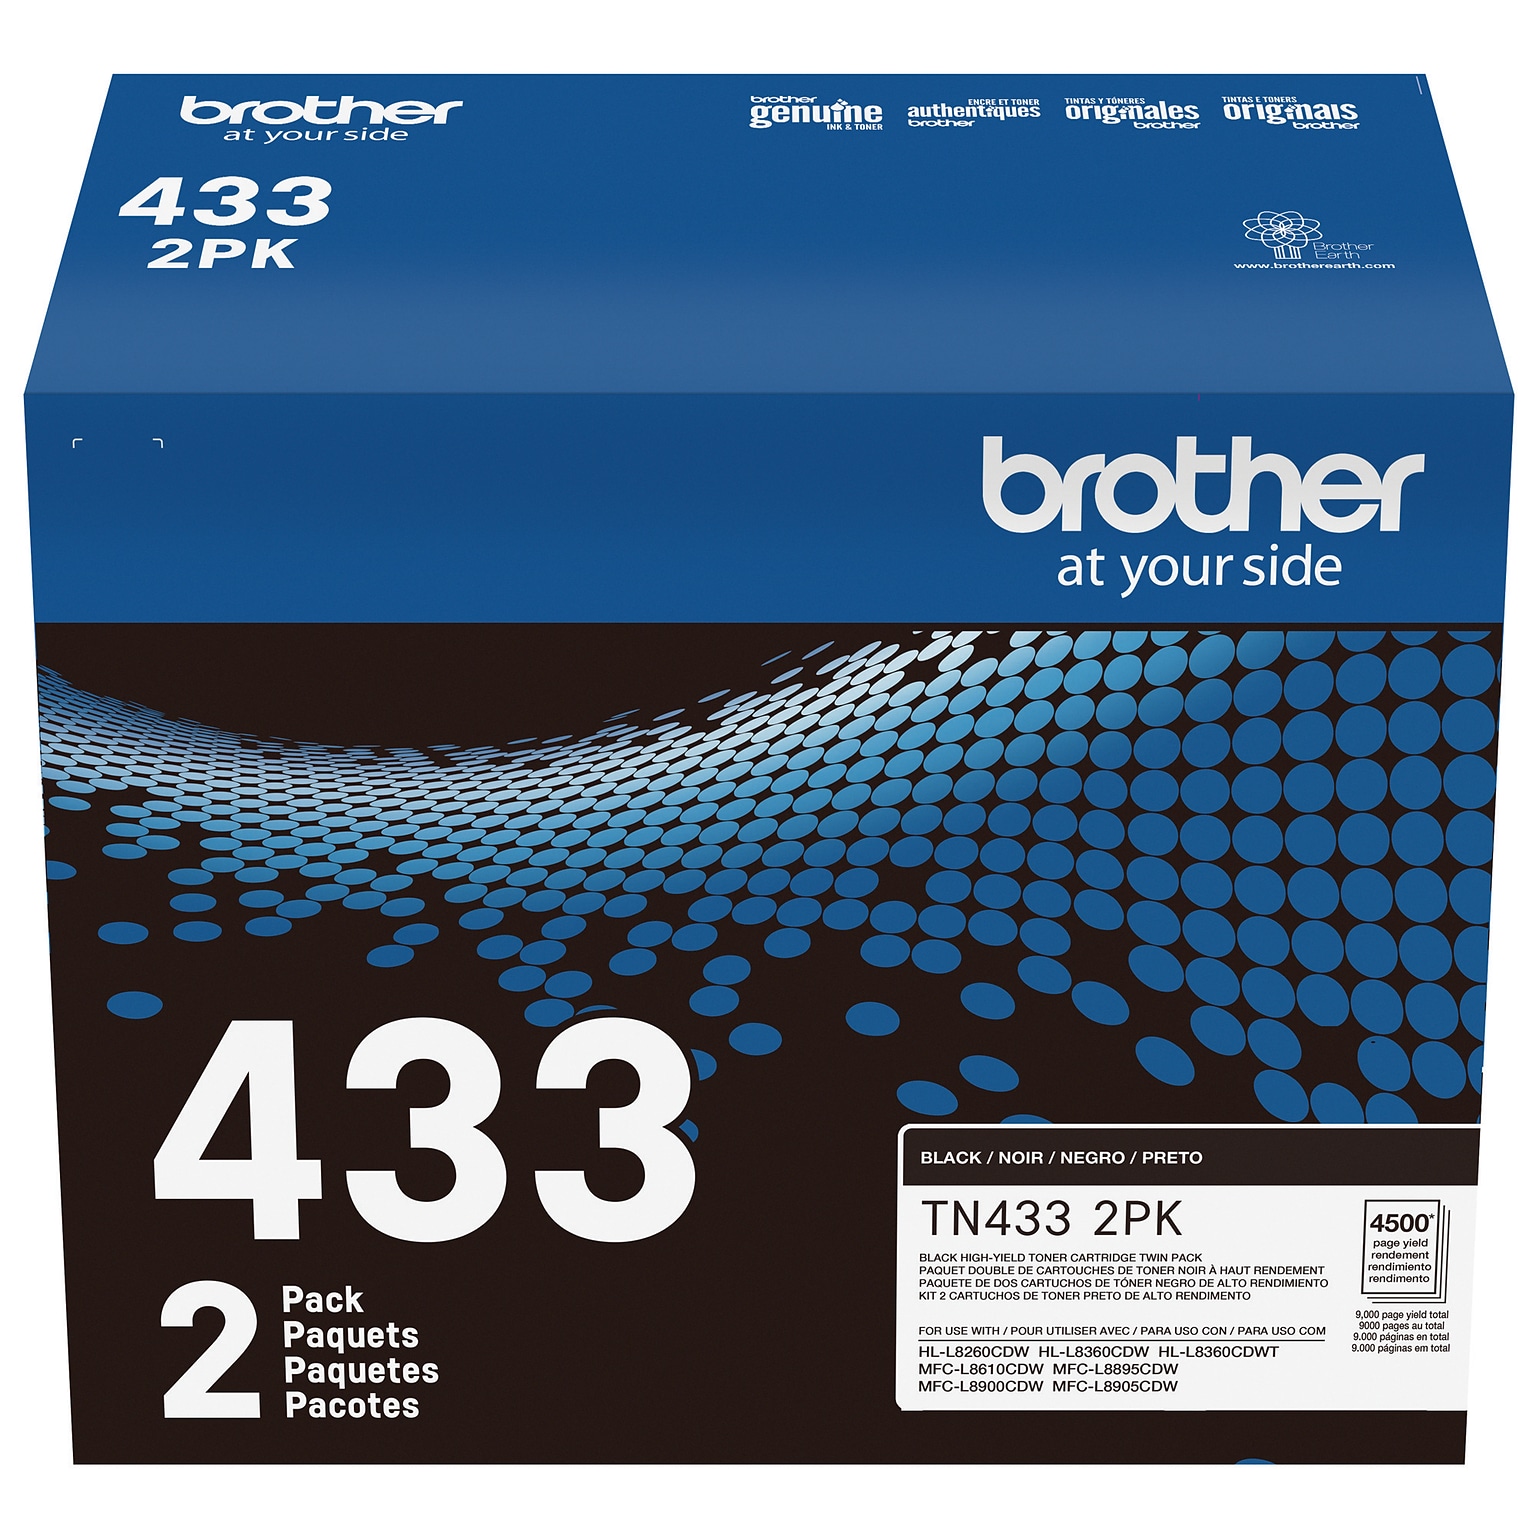 Brother TN-433 Black High Yield Toner Cartridge, Up to 4,500 Pages, 2/Pack (TN4332PK)